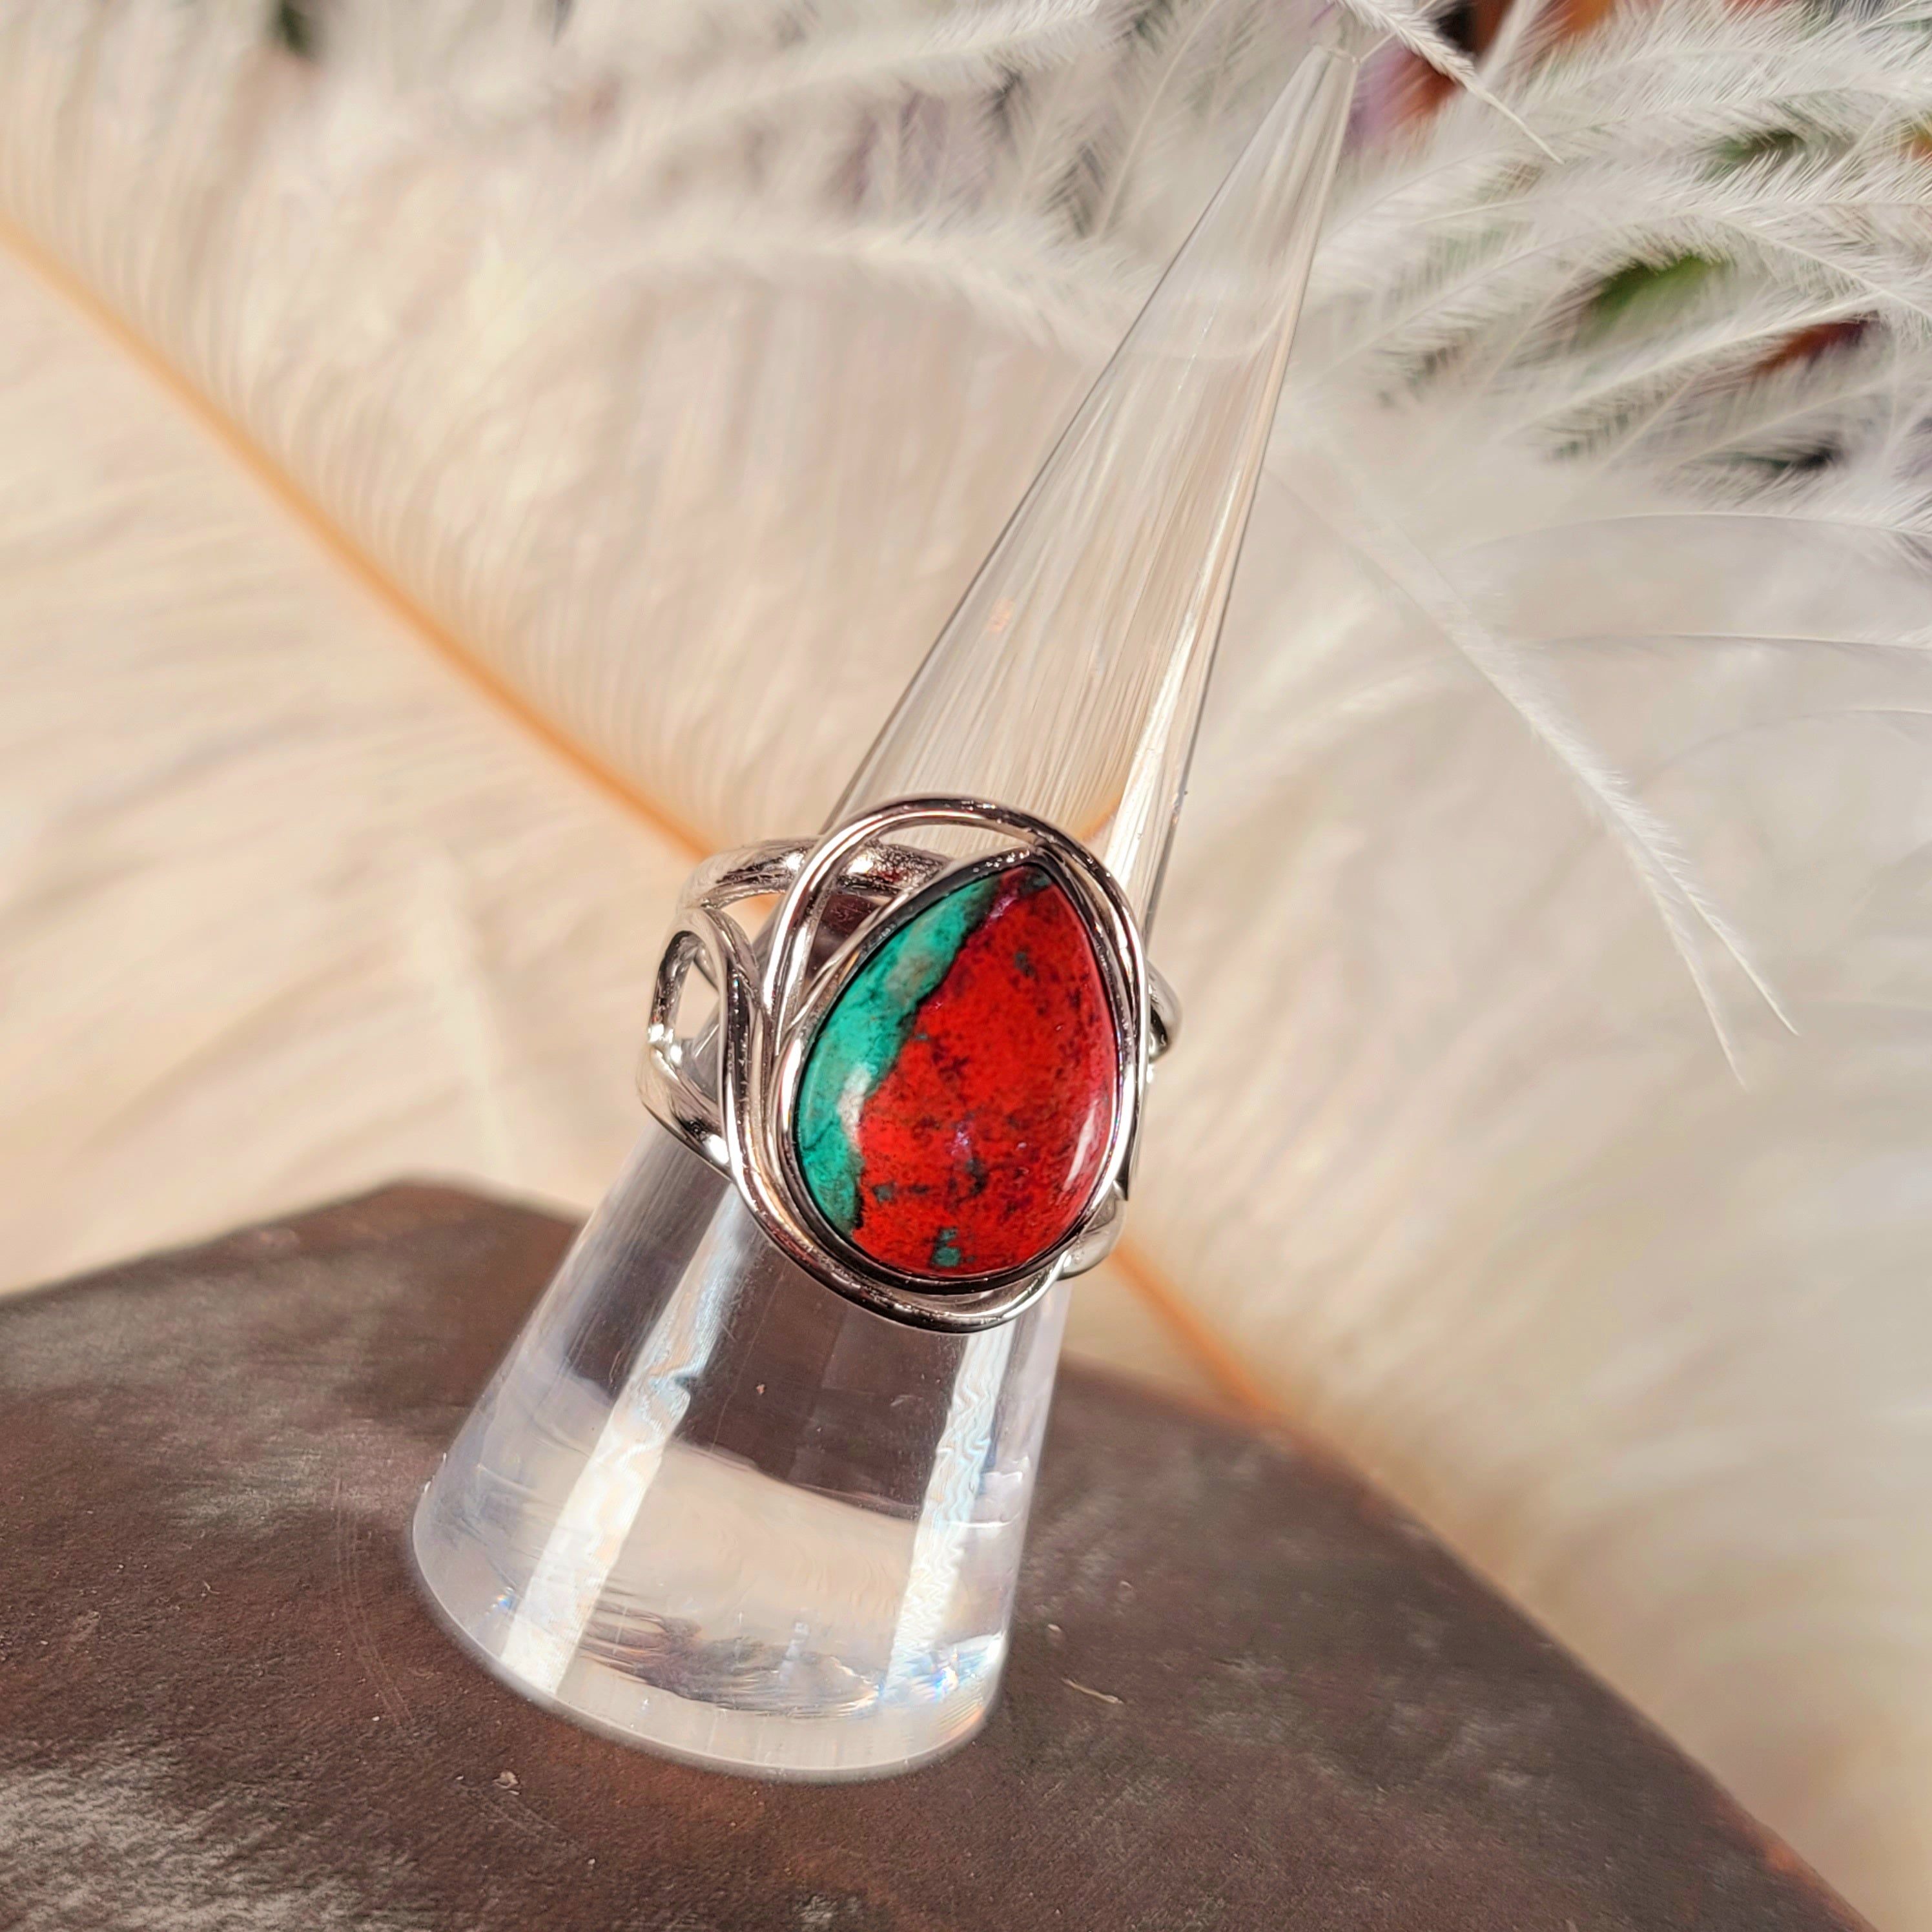 Sonora Sunset Finger Cuff Adjustable Ring .925 Silver for Alchemy, Empowerment and Manifesting